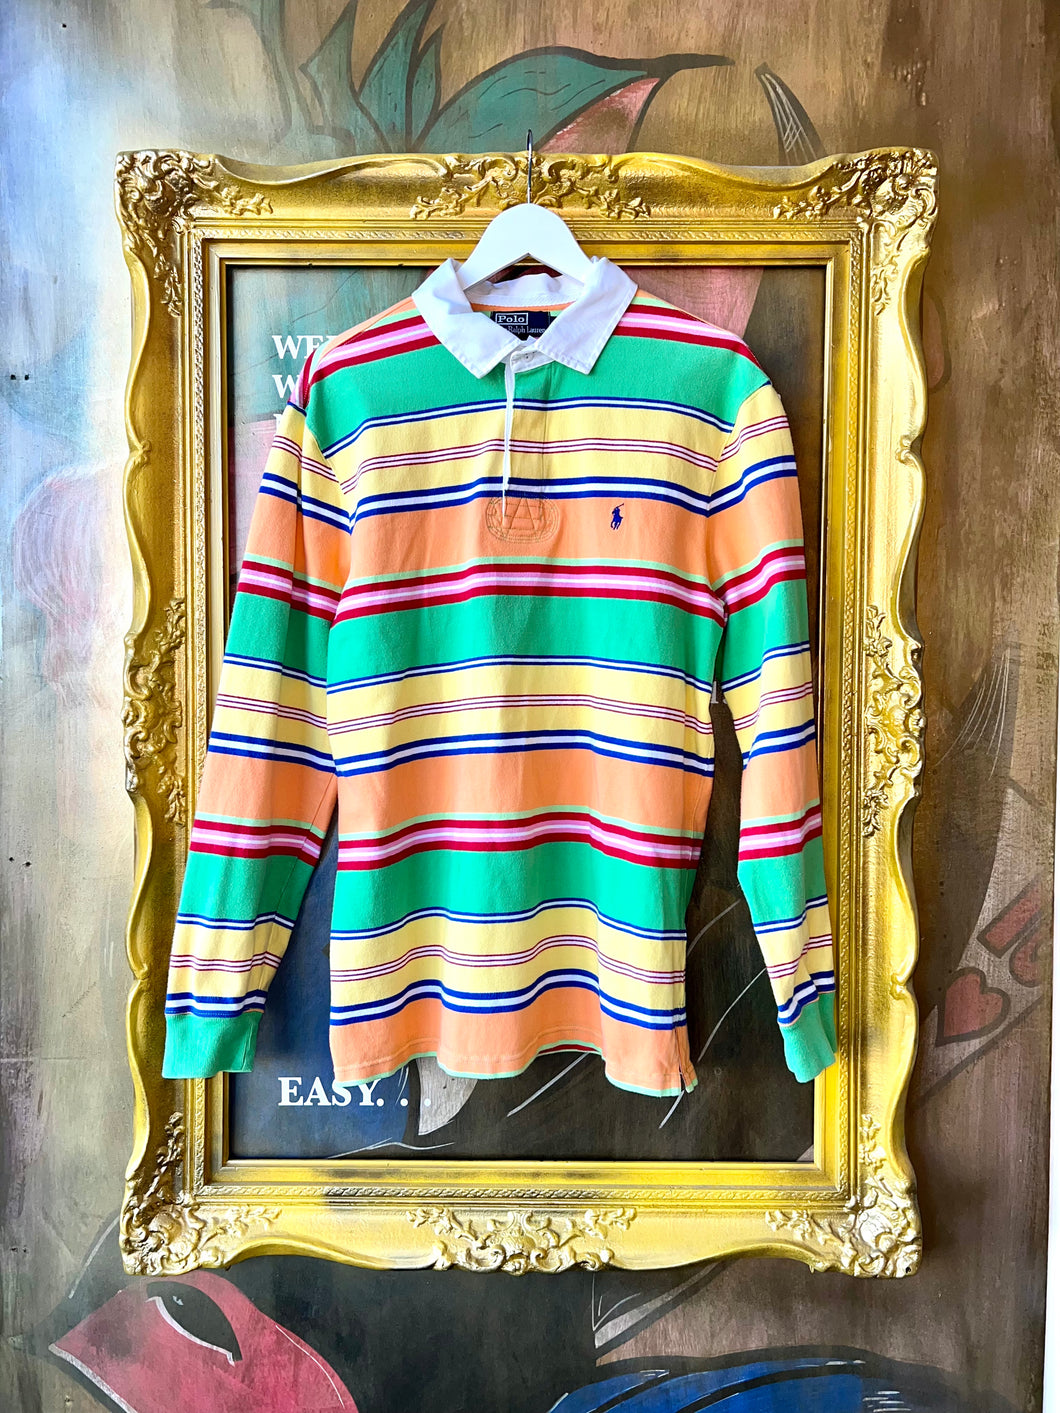 MENS VINTAGE POLO BY RALPH LAUREN RAINBOW STRIPE RUGBY SHIRT